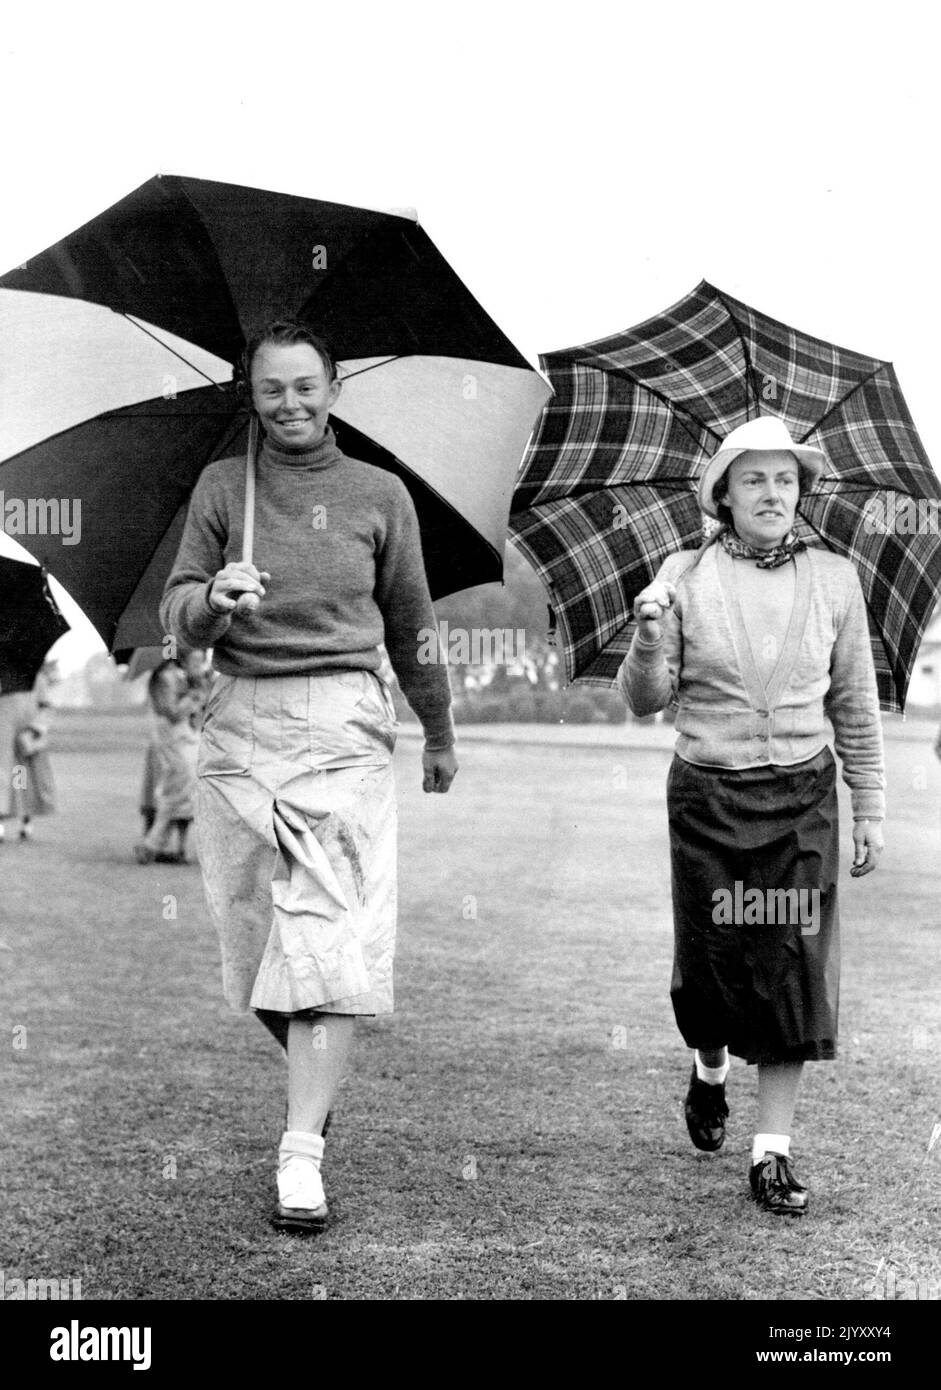 Wet weather married the second day's play in the Australian women’s Jubilee amateur golf championships at Kooyonga on Thursday. Here Miss J. Percy (Q), left, and Miss B. Kernot (Vic.) walk to the 17th green. Both were in the 16 to qualify, and Miss Percy’s 77 was the best round for the day. September 1, 1951. Stock Photo